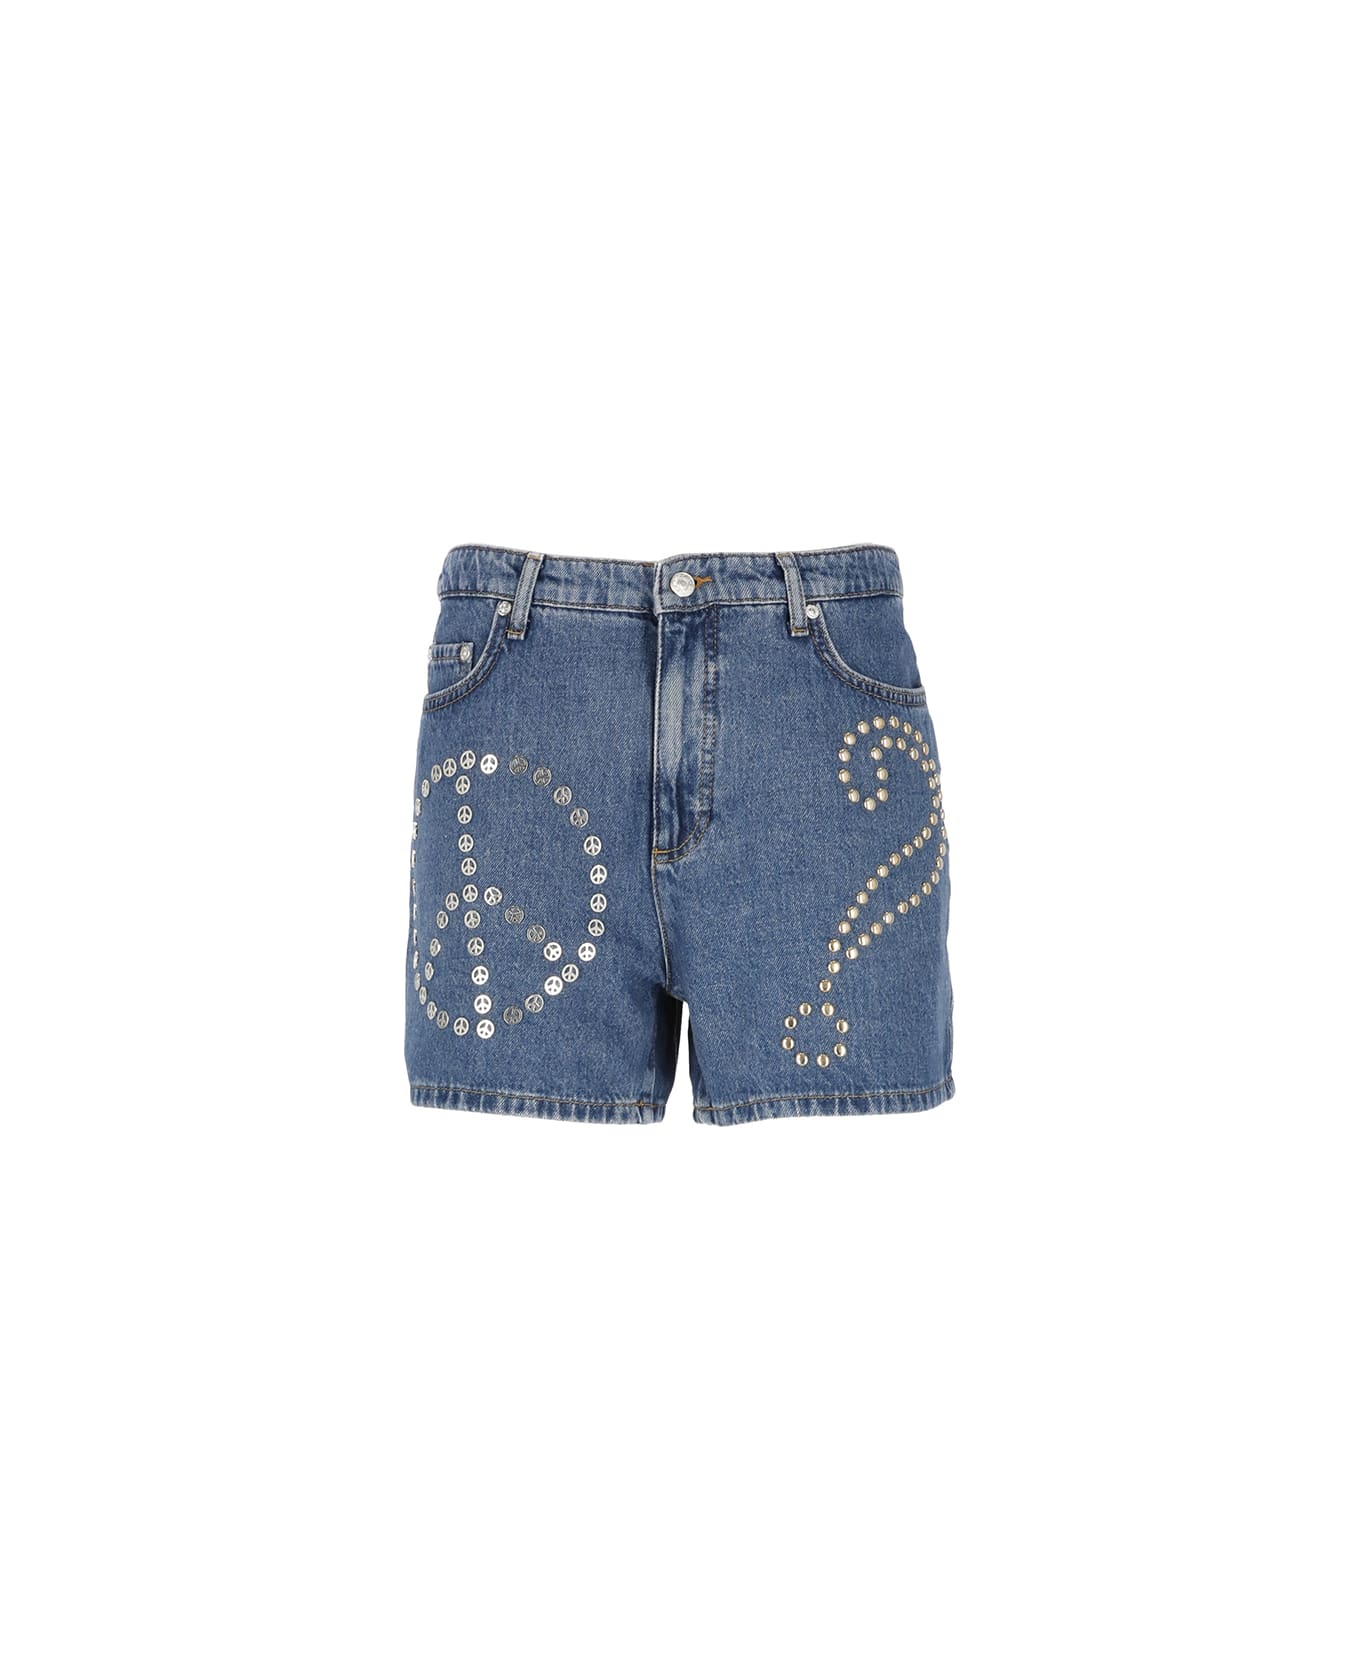 M05CH1N0 Jeans Shorts With Stud - Blue